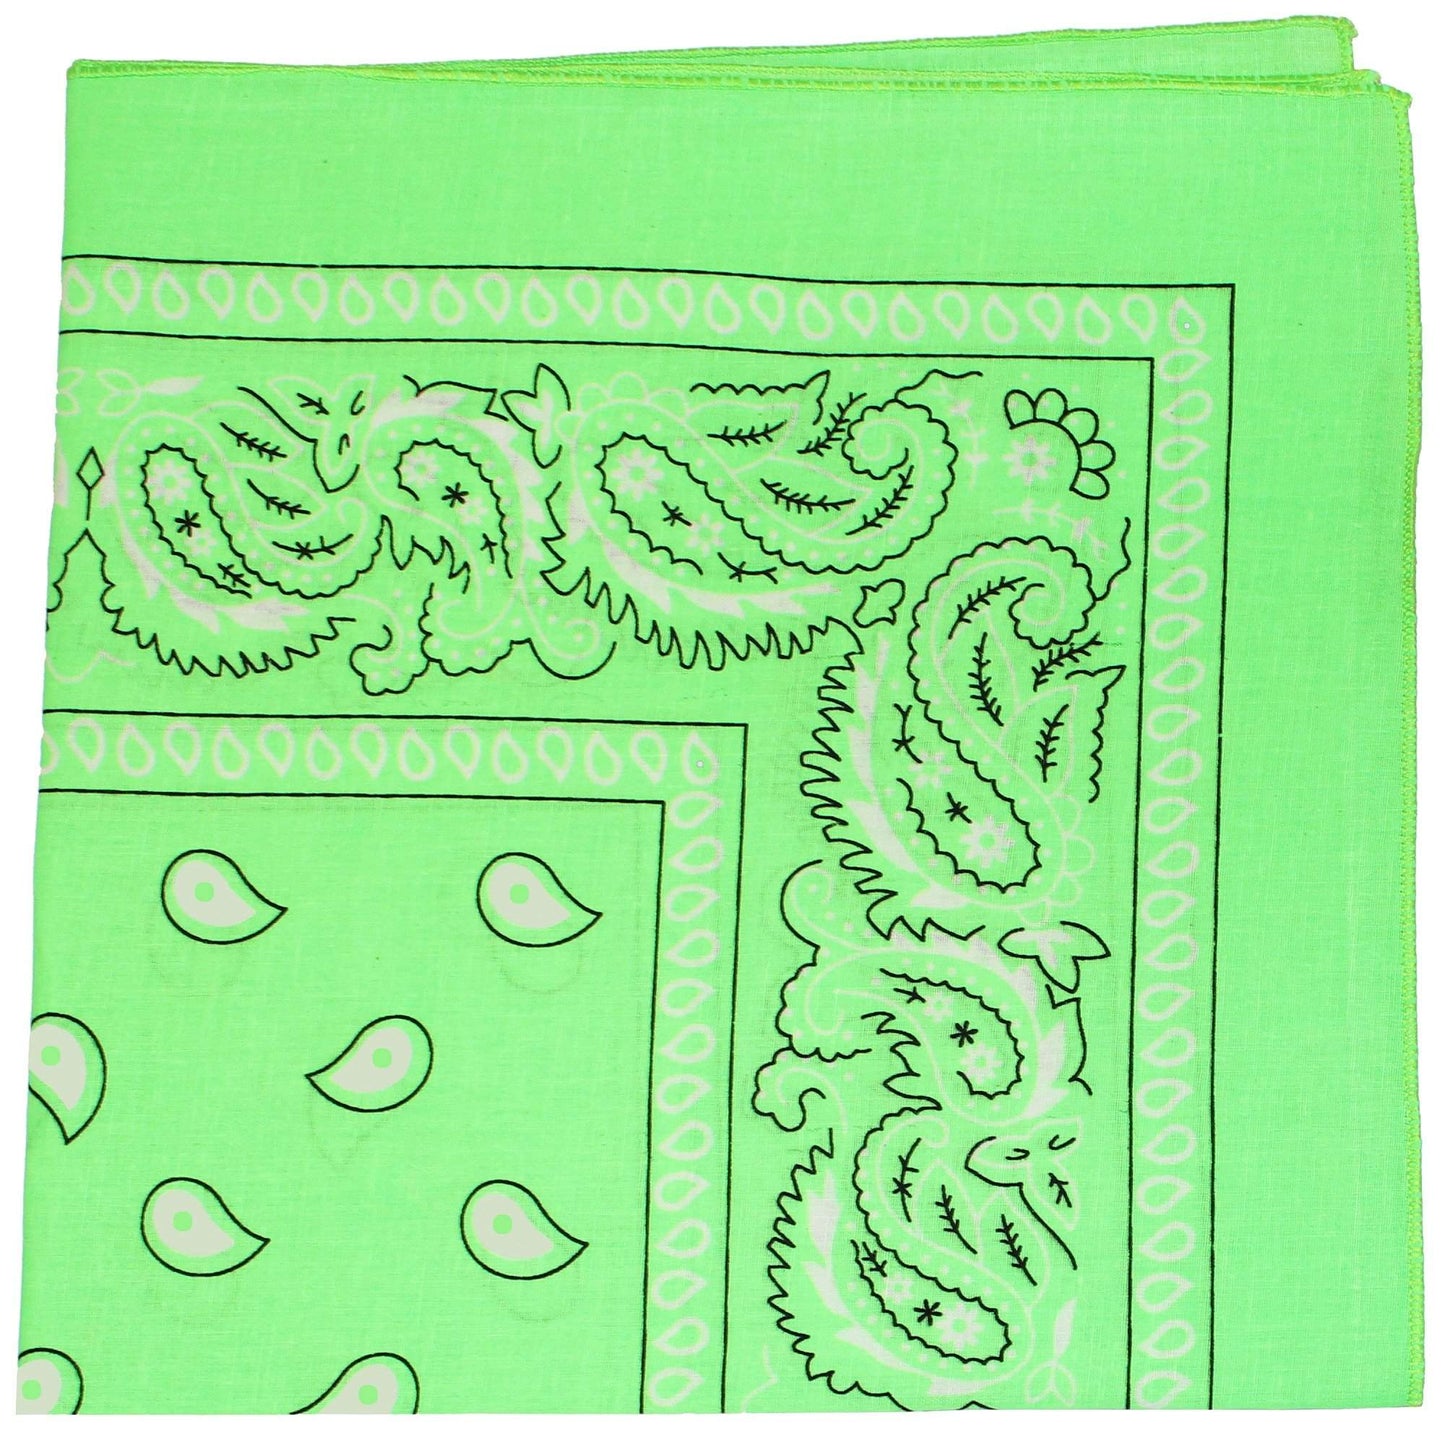 Mechaly Paisley 100% Cotton Double Sided Bandanas - 24 Pack